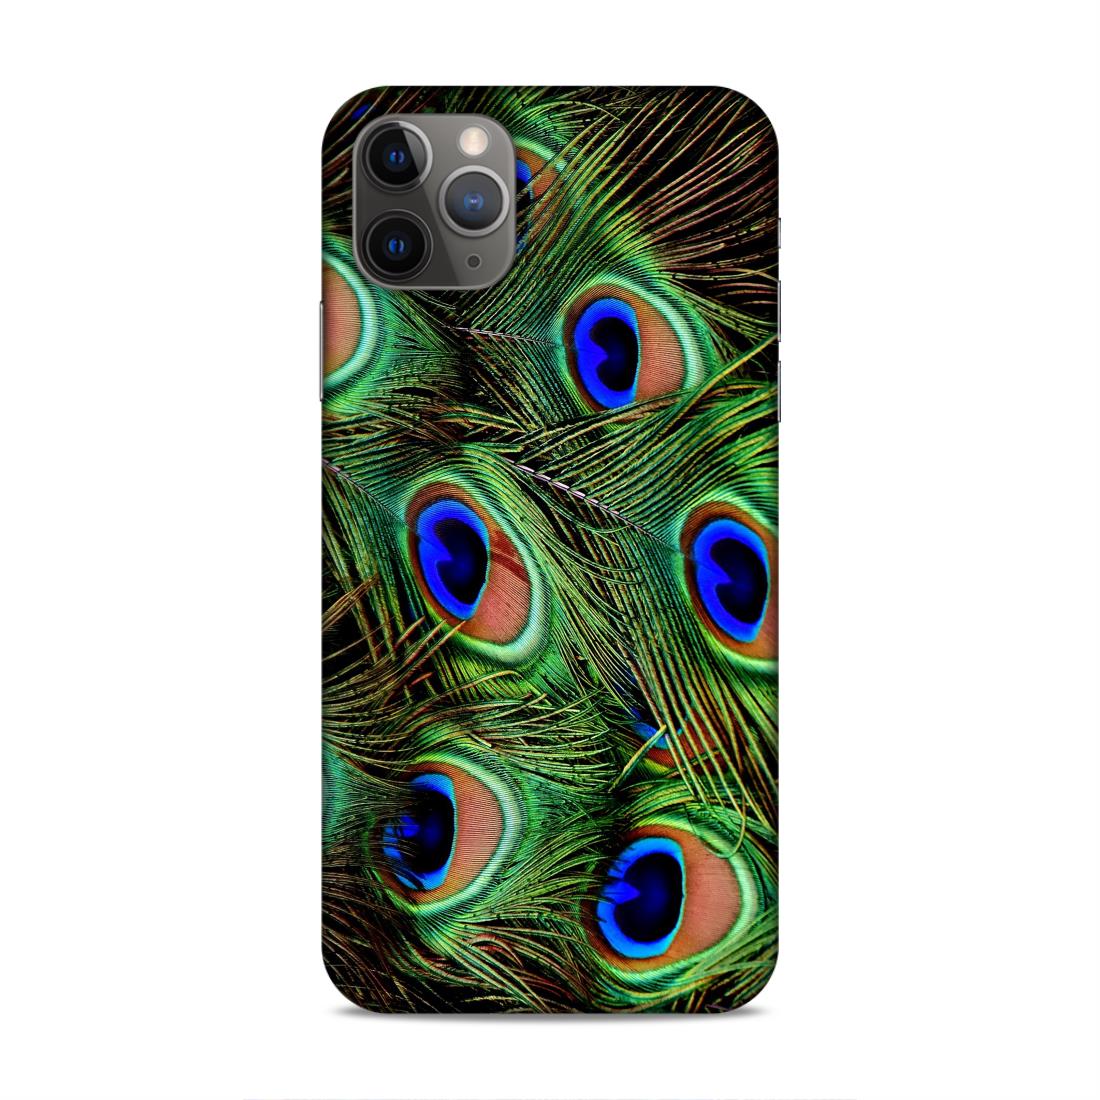 Peacock Feather Hard Back Case For Apple iPhone 11 Pro Max